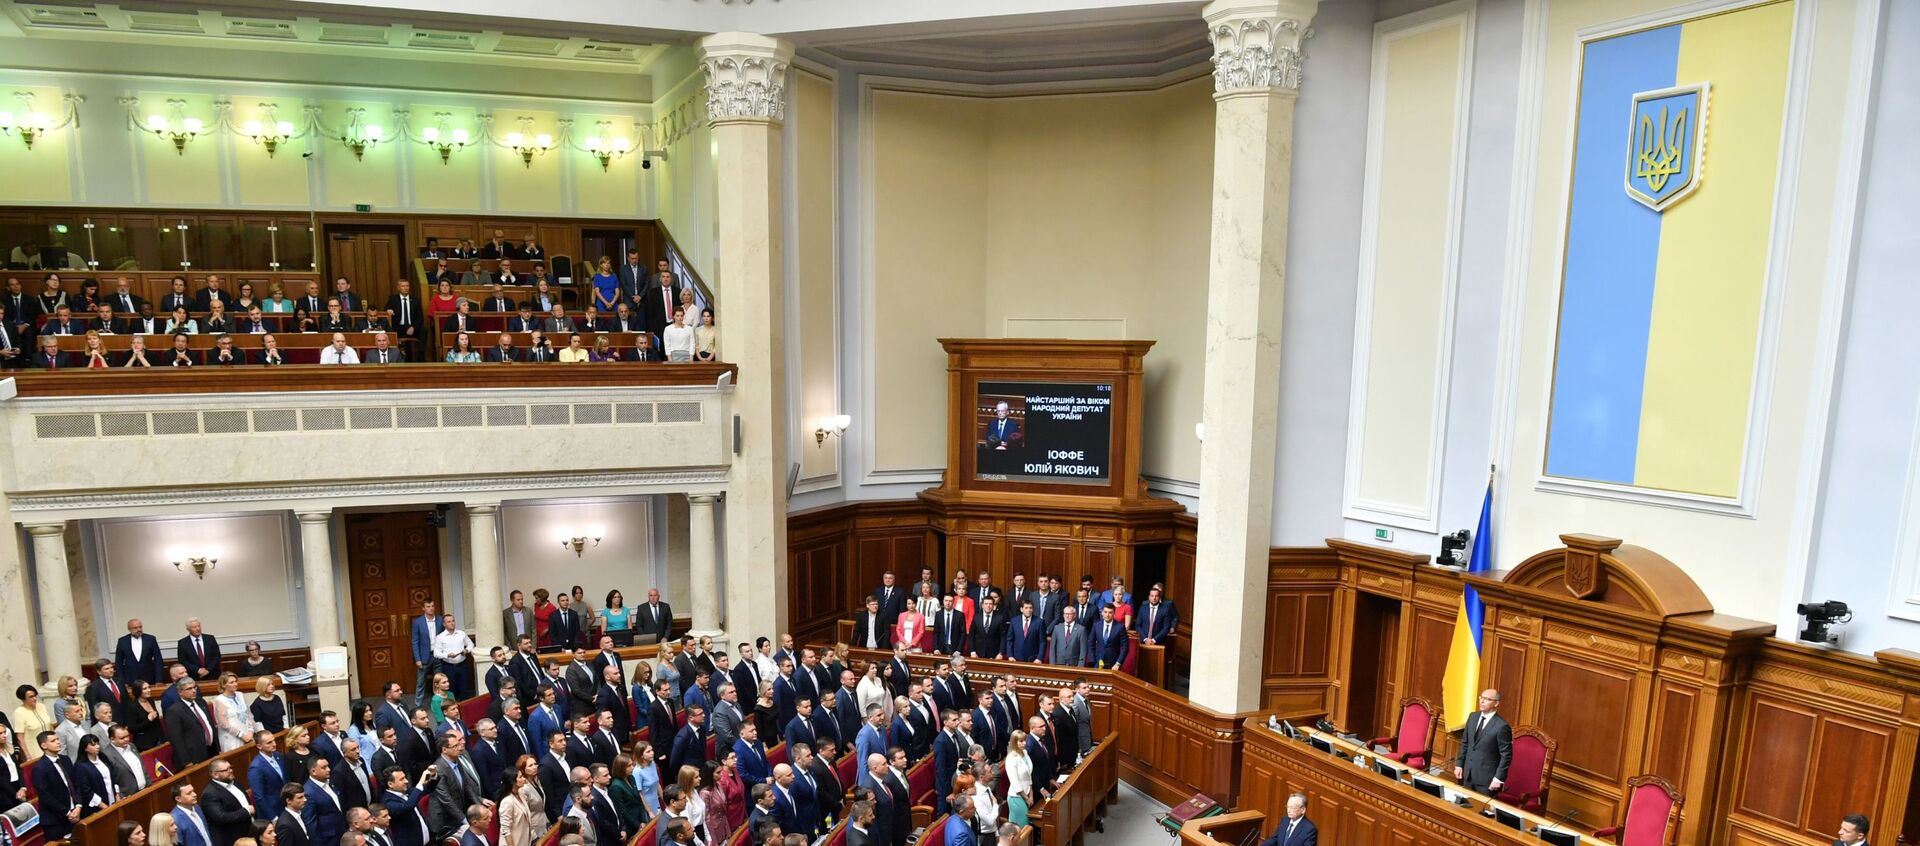 Lawmakers during the solemn opening and first sitting of the new parliament, the Verkhovna Rada, in Kiev - Sputnik International, 1920, 31.03.2020